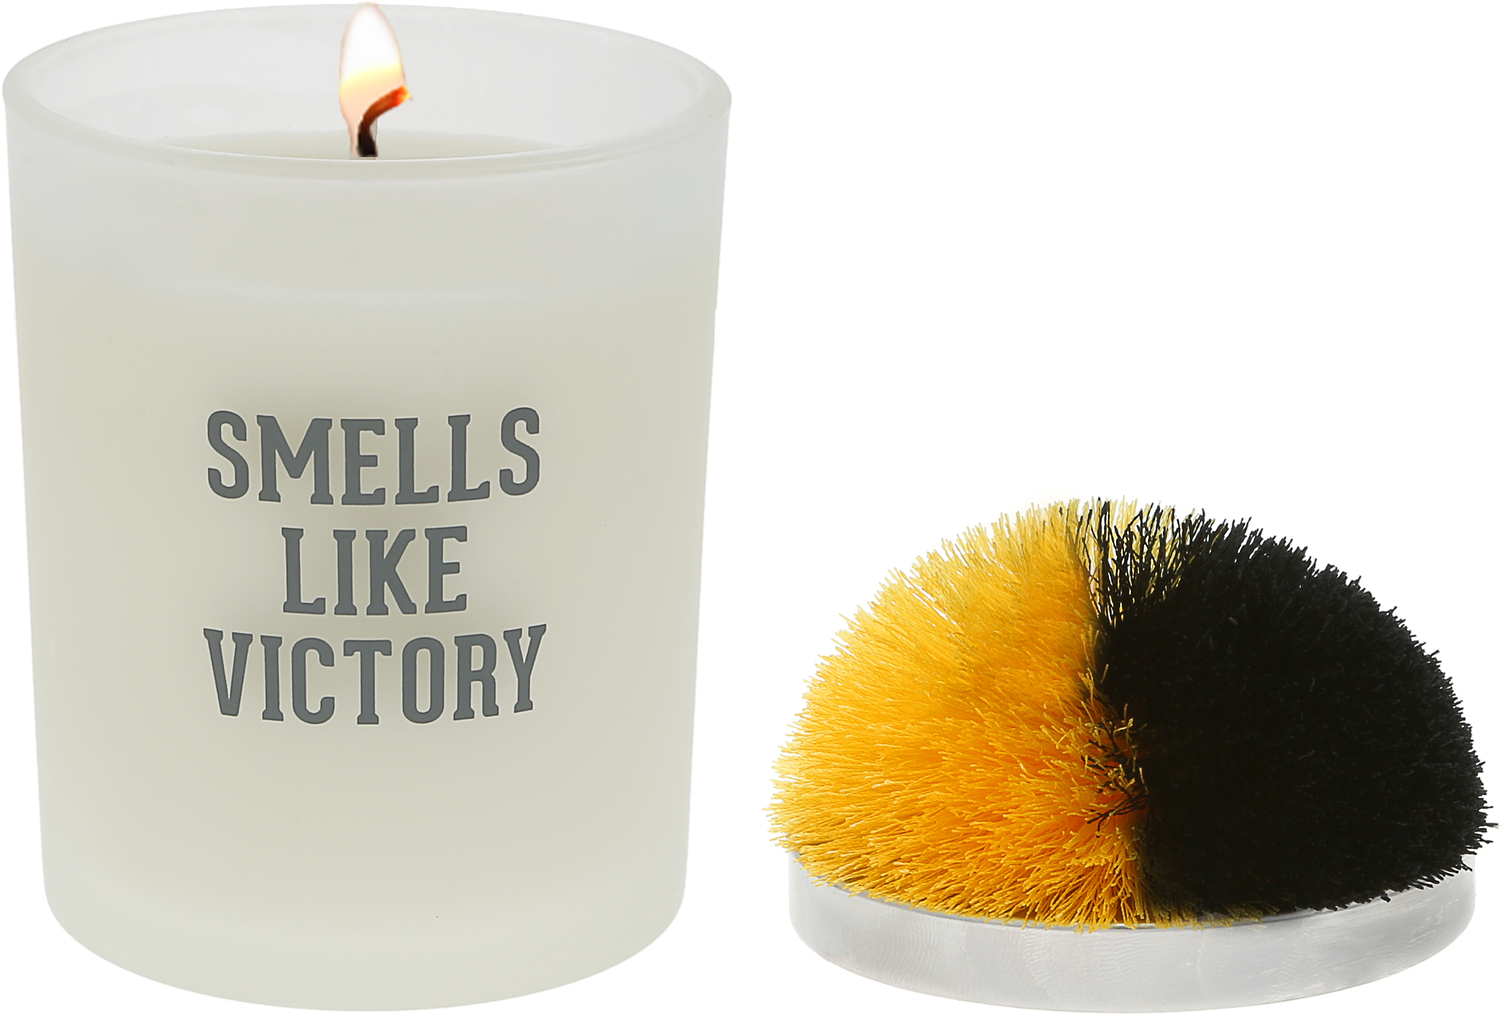 Victory - Black & Yellow by Repre-Scent - Victory - Black & Yellow - 5.5 oz - 100% Soy Wax Candle with Pom Pom Lid
Scent: Tranquility